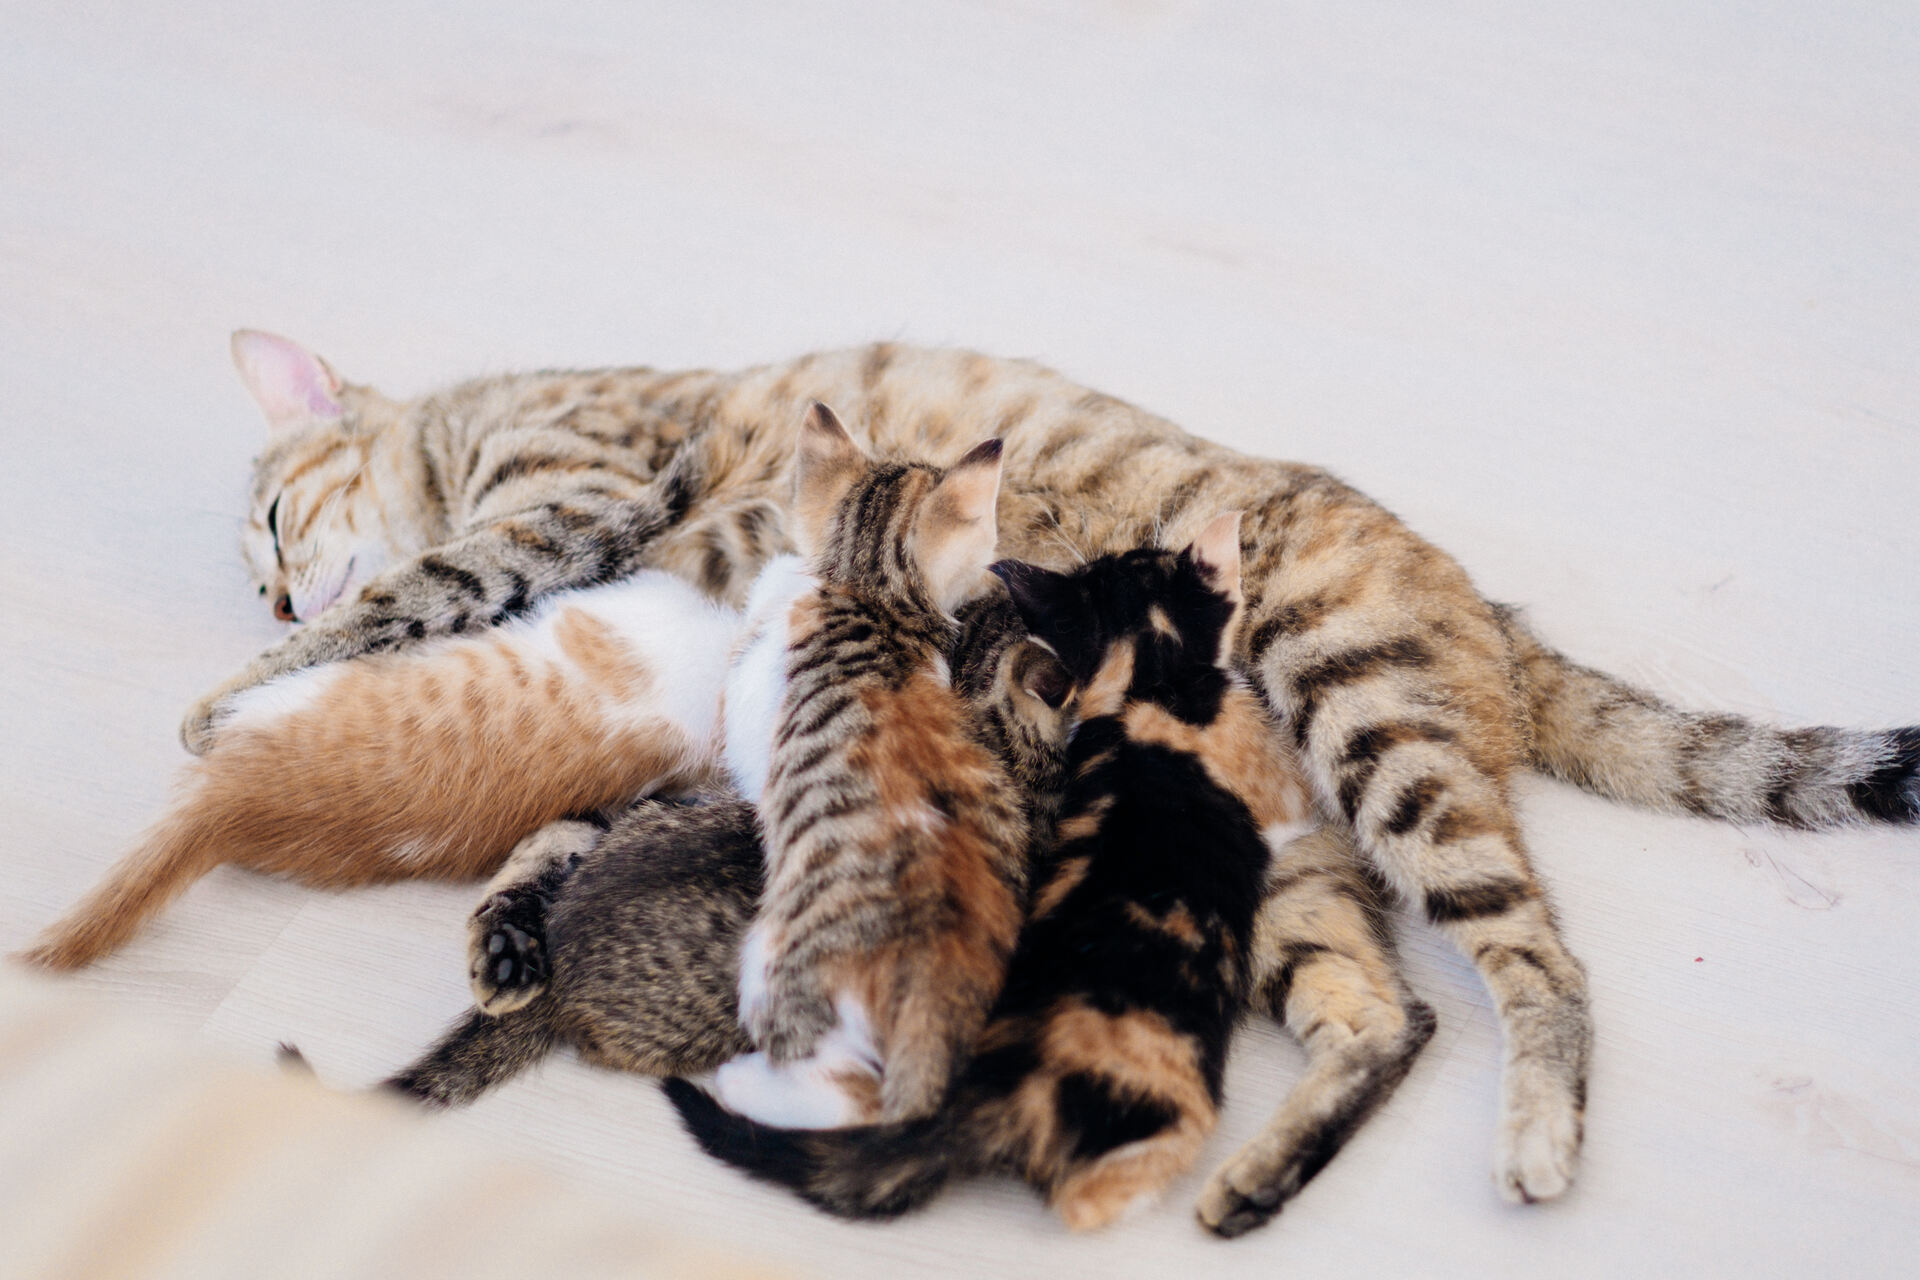 A cat with a litter of kittens